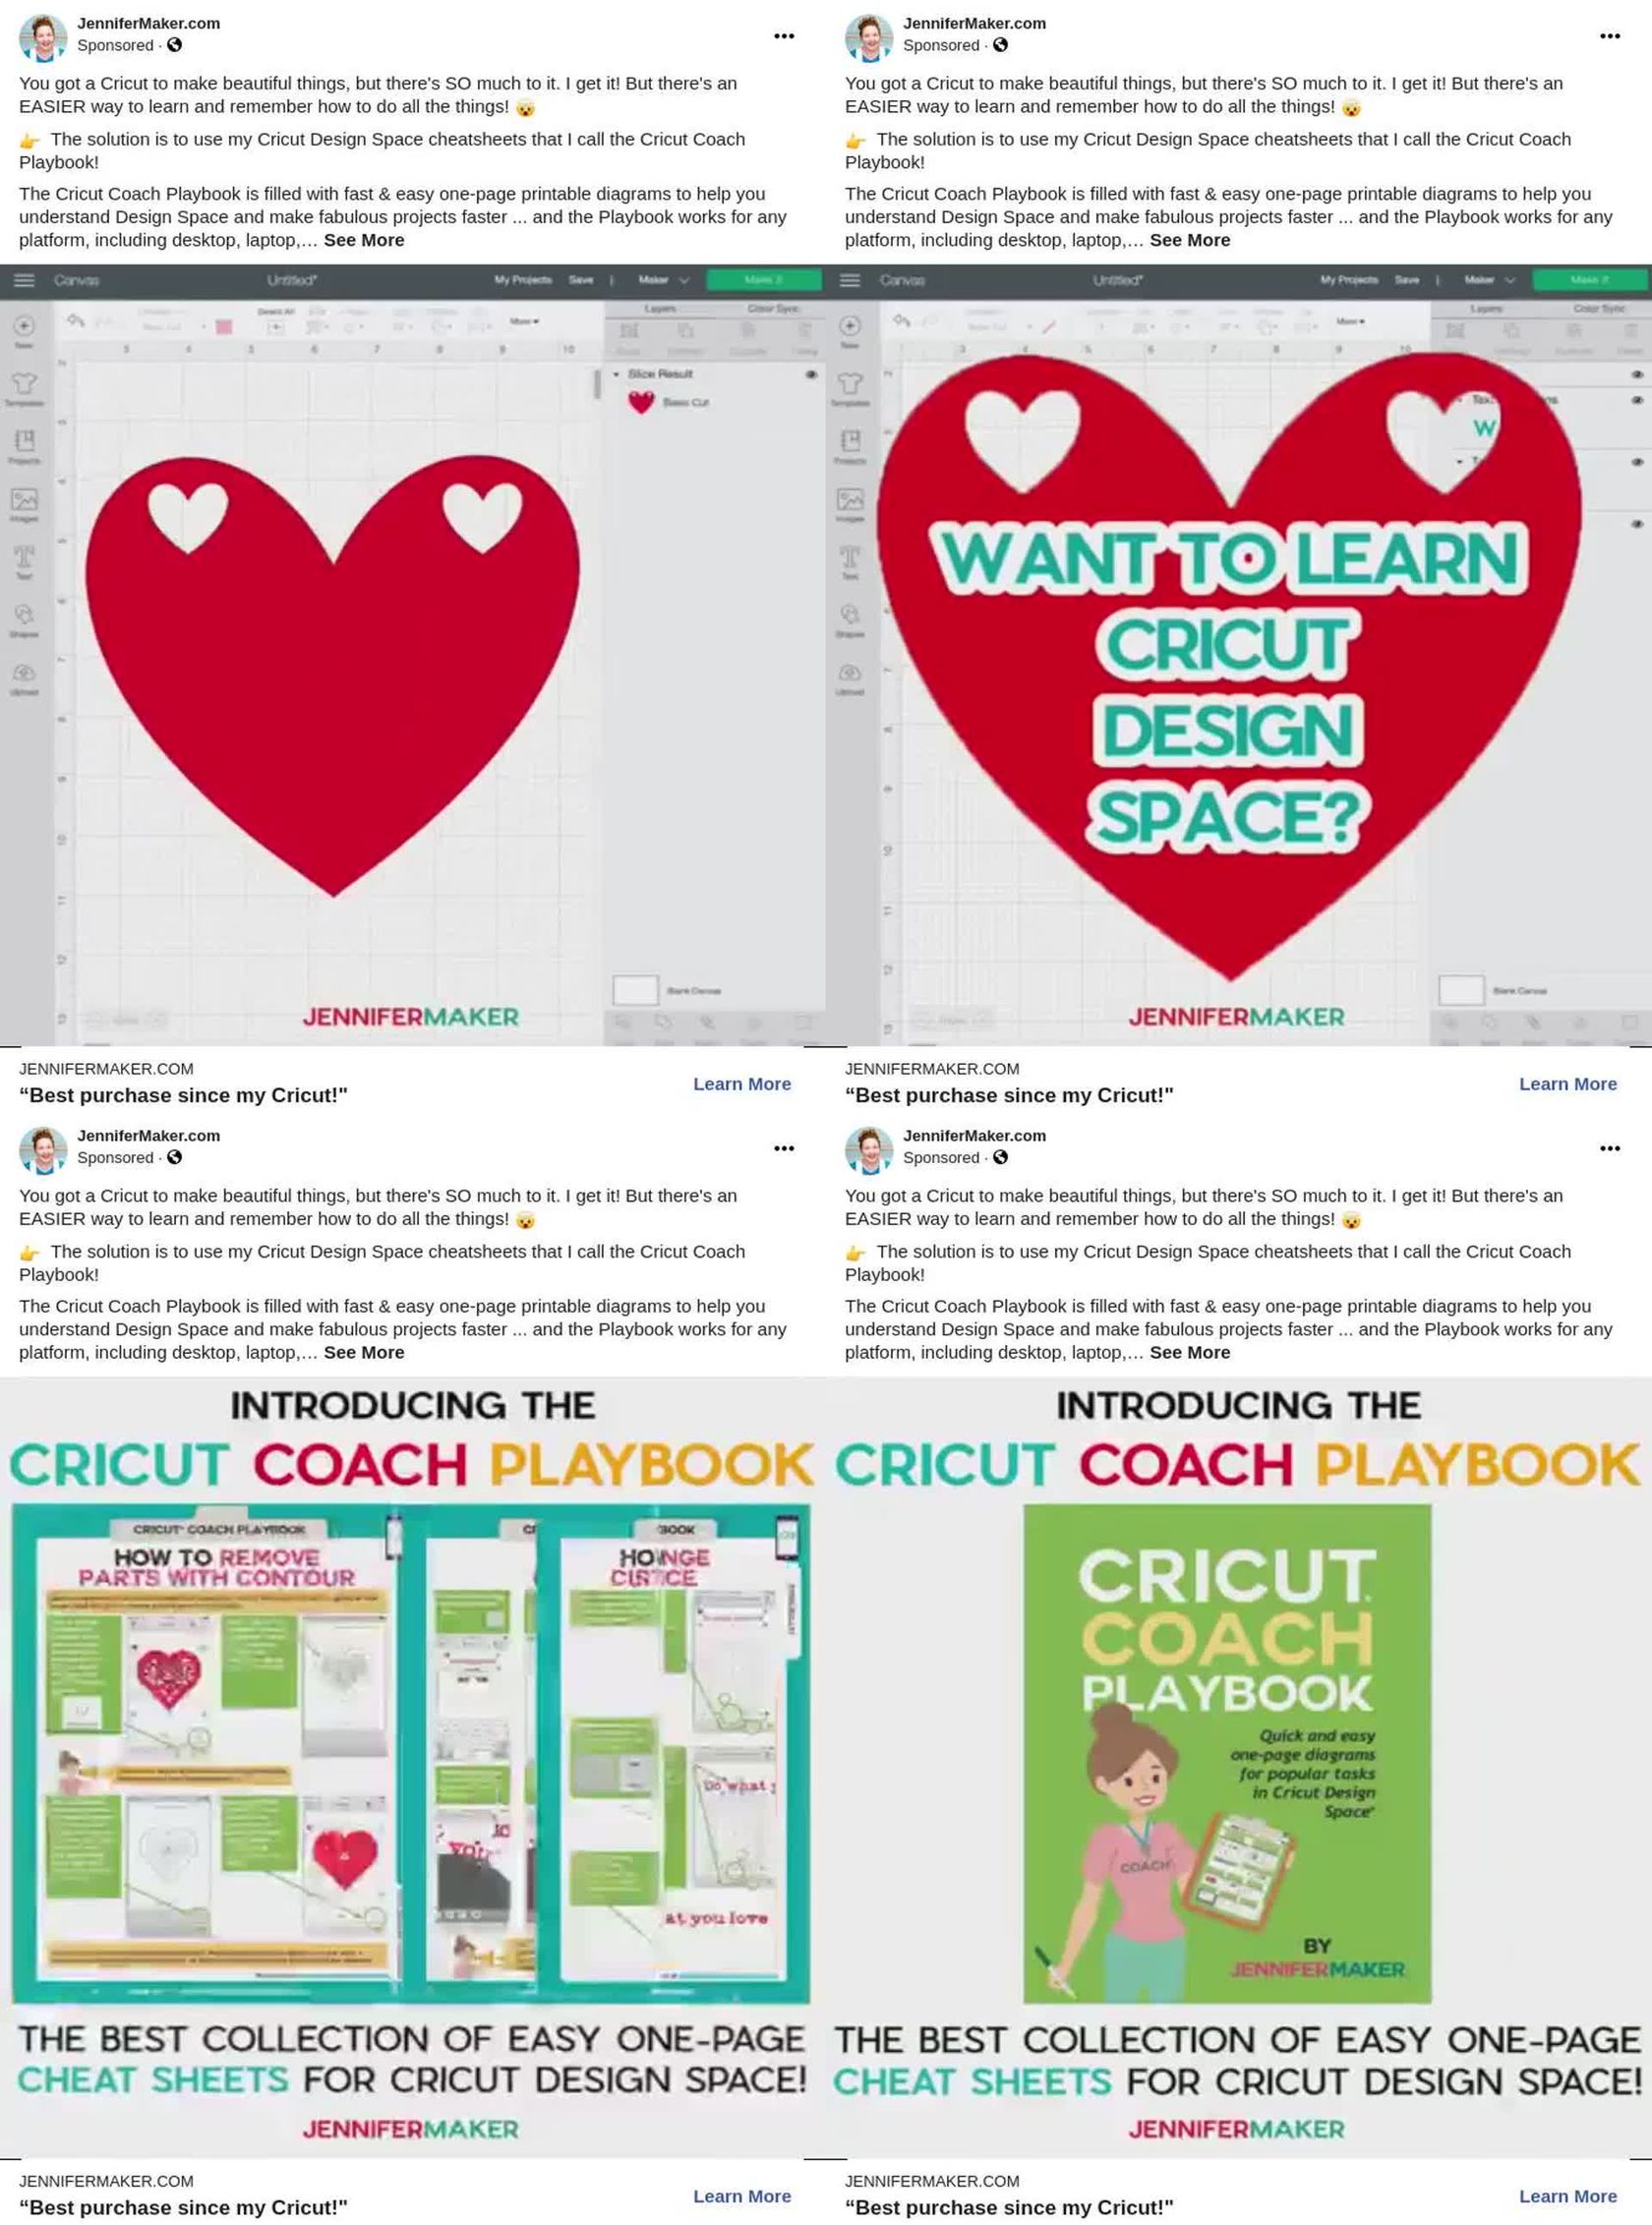 Cricut Coach Playbook: Quick and Easy One-Page Diagrams for Popular Tasks  in Cricut Design Space Ad